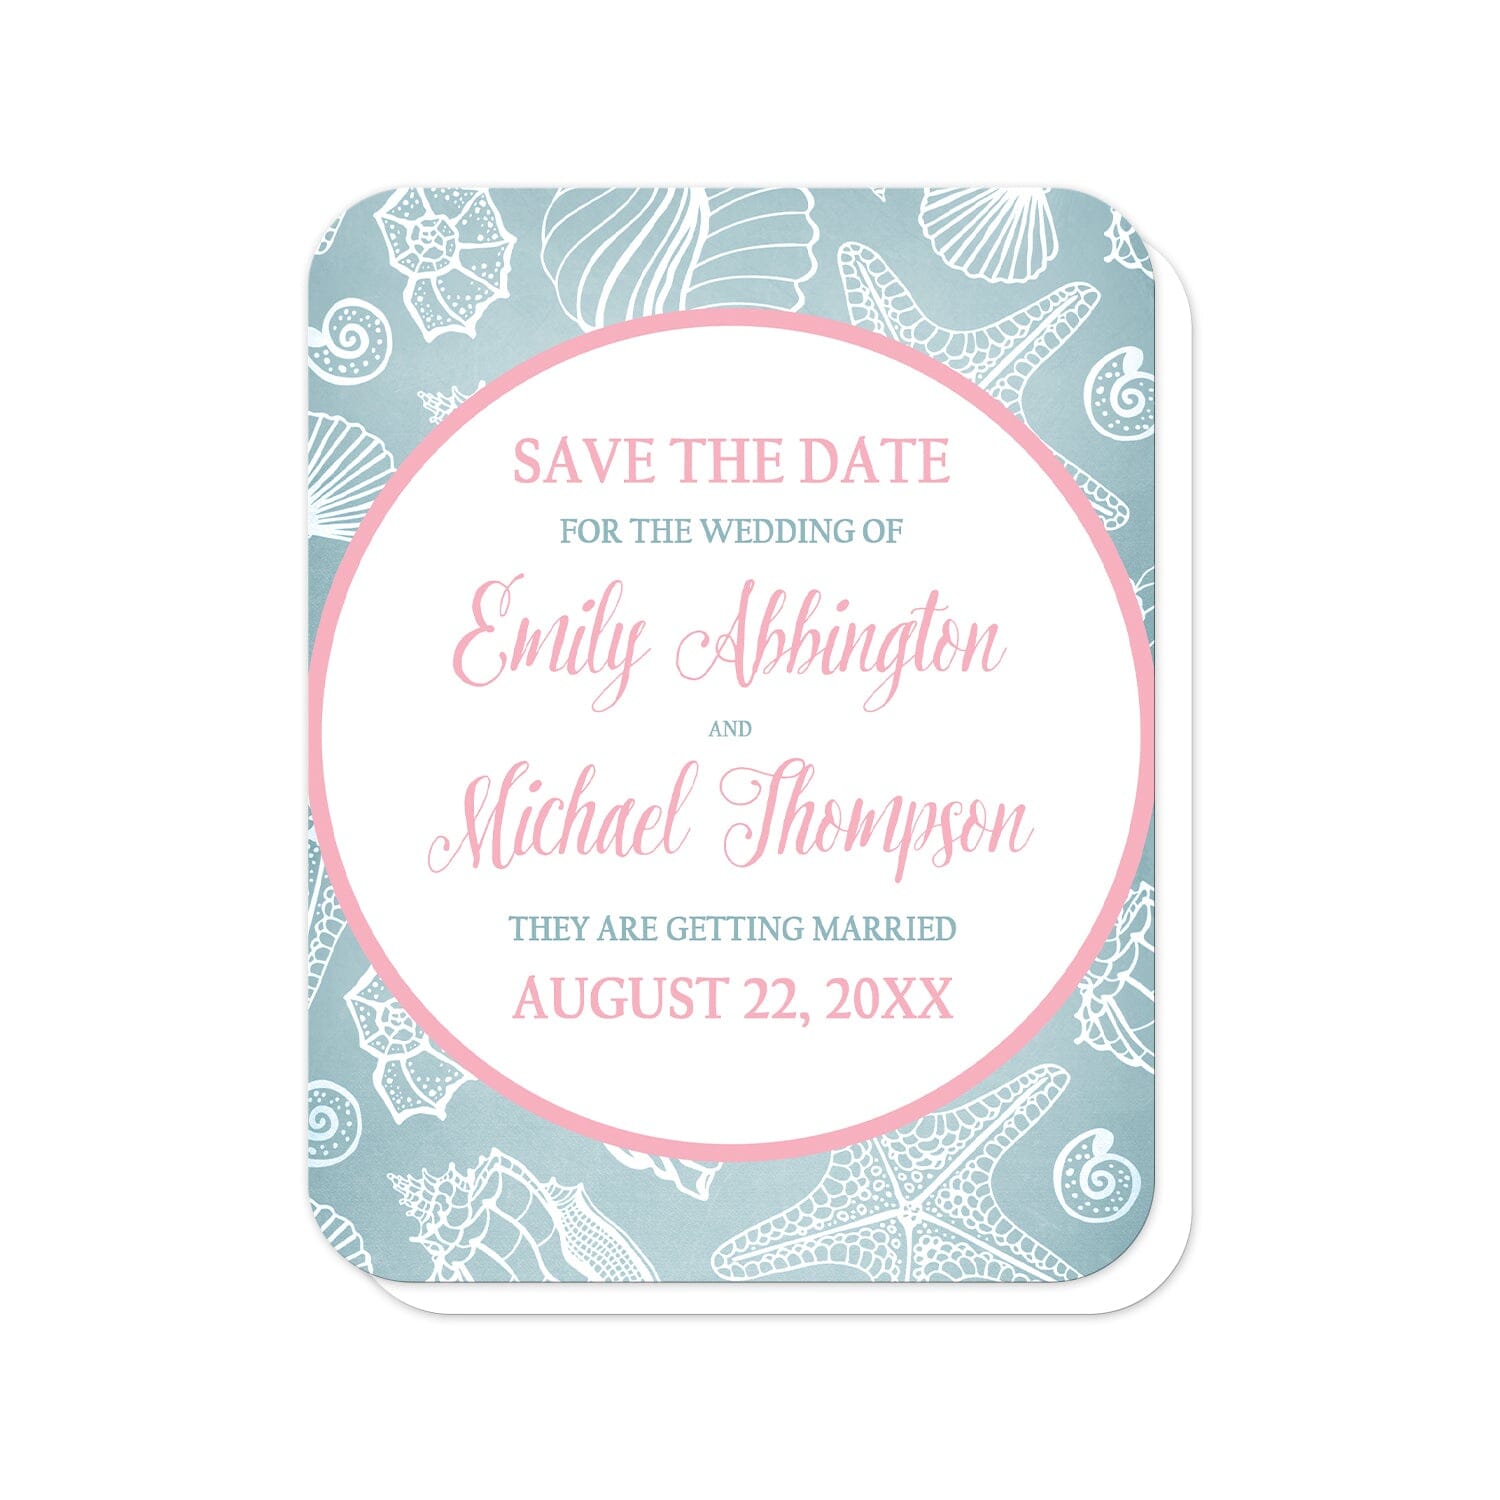 Blue Seashell Pink Beach Save the Date Cards (with rounded corners) at Artistically Invited. Blue seashell pink beach save the date cards designed with your personalized wedding announcement details custom printed in pink and blue, inside a pink outlined white circle, over a blue and white seashell pattern background.